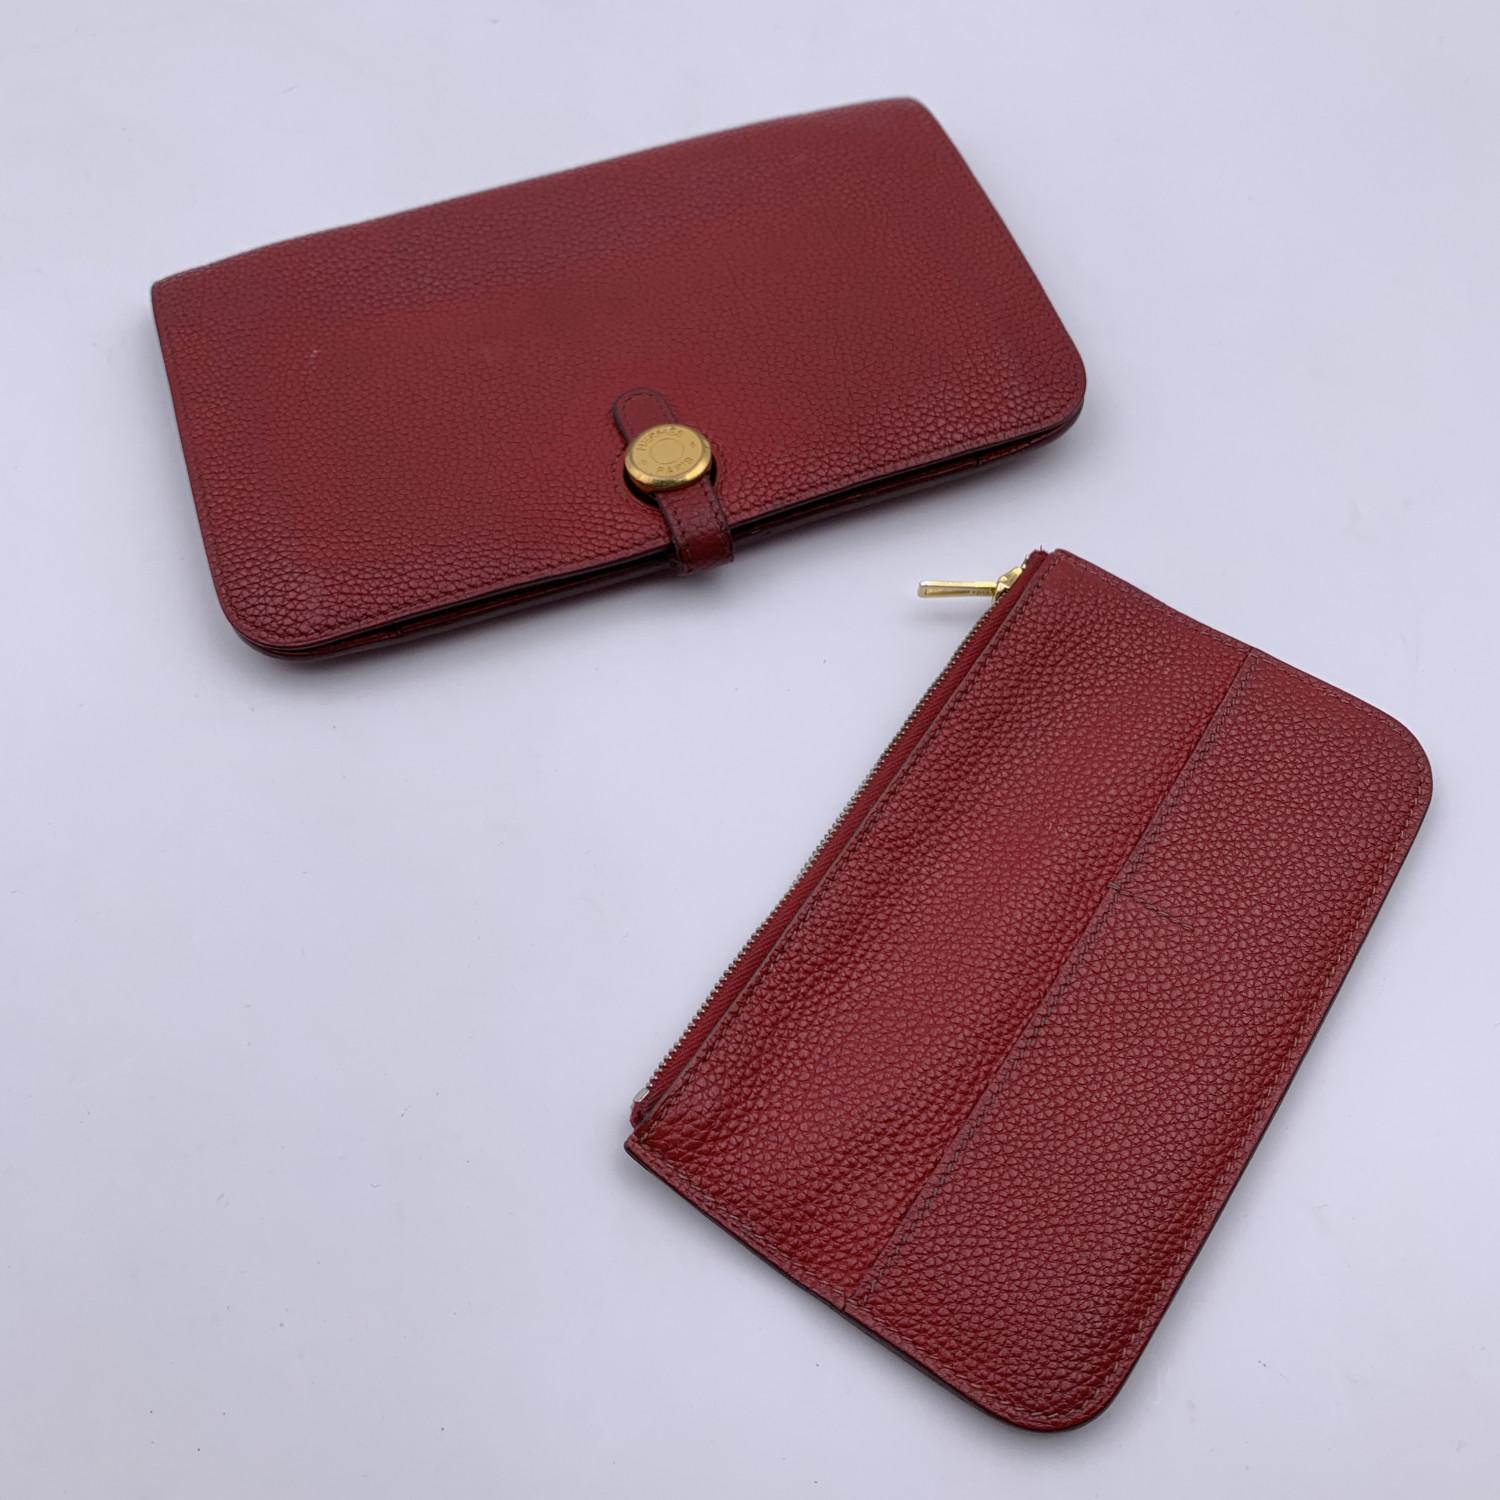 Hermes Dogon Duo wallet in red Togo leather. Bifold design with gold metal Clou de Selle closure. Red leather lining. Inside it has a removable coin purse with zip closure, five compartments for credit cards, a compartment for bill s and 2 open